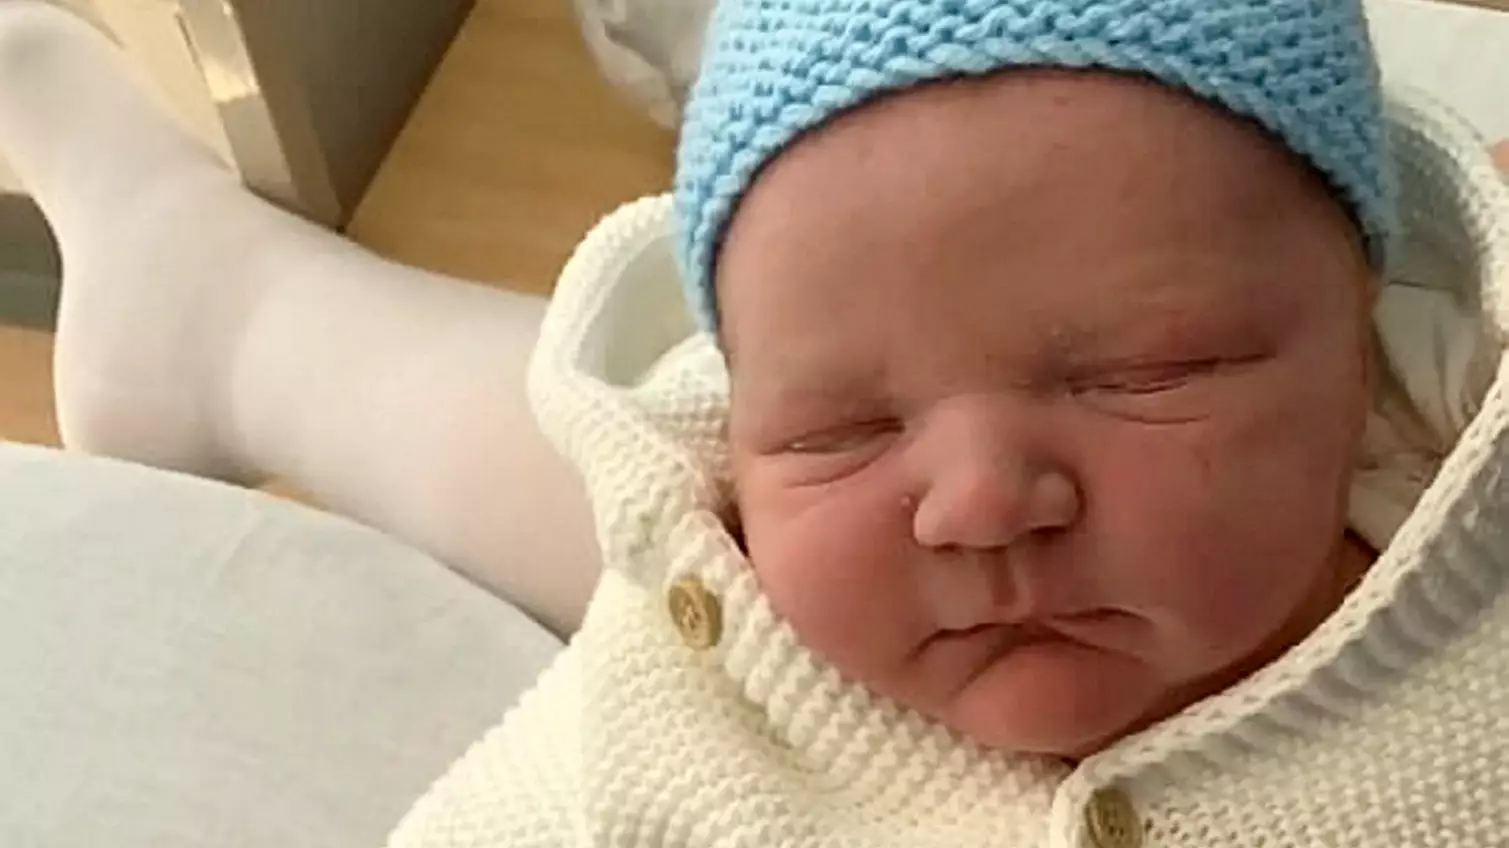 Mum Naturally Gives Birth To One Of Britain's Biggest Babies 